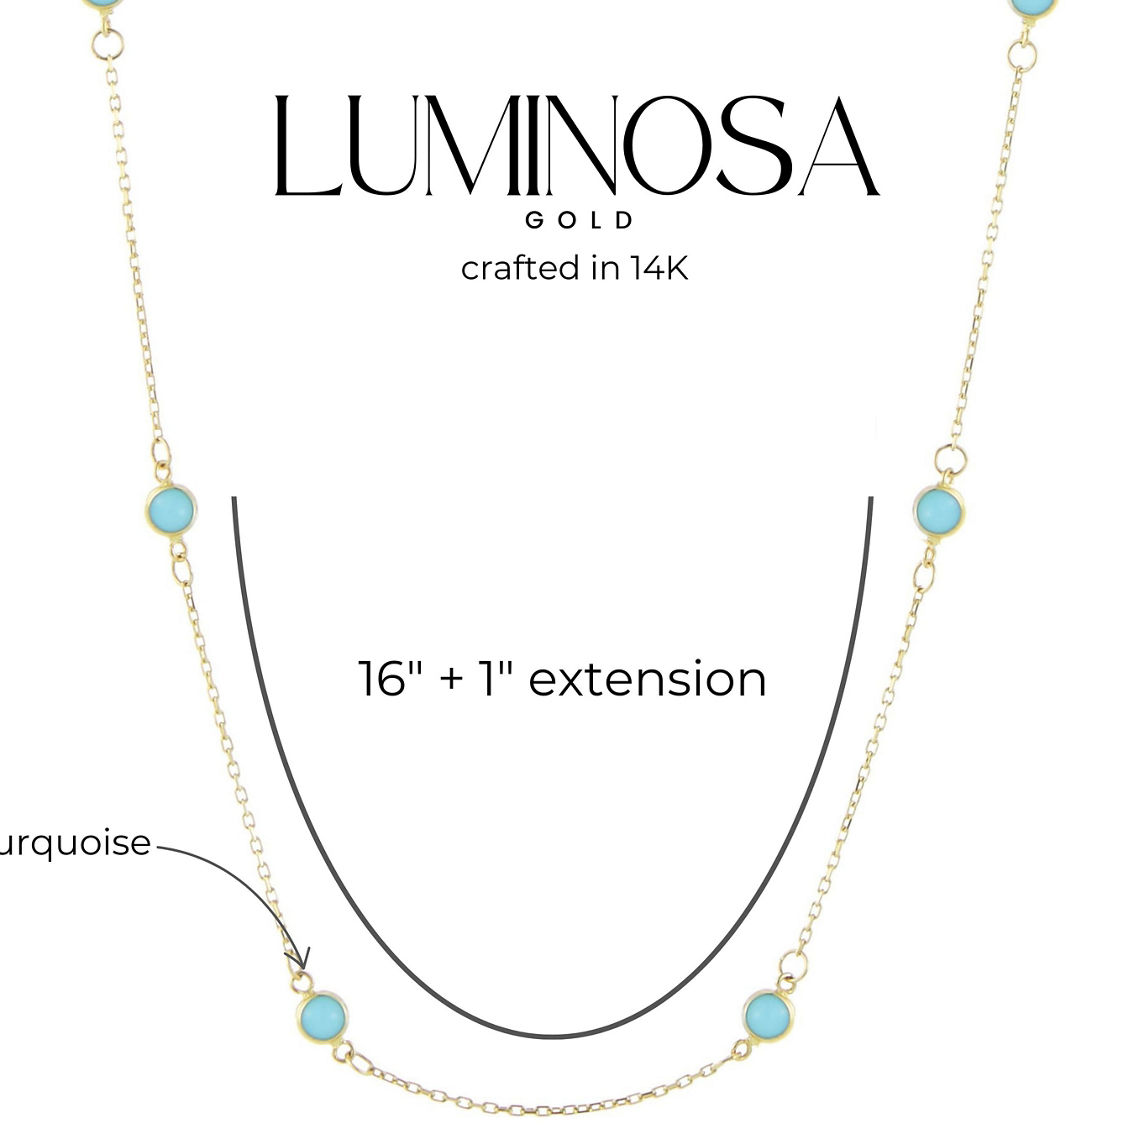 Luminosa Gold 14K Gold and Turquoise Station Necklace - Image 3 of 5